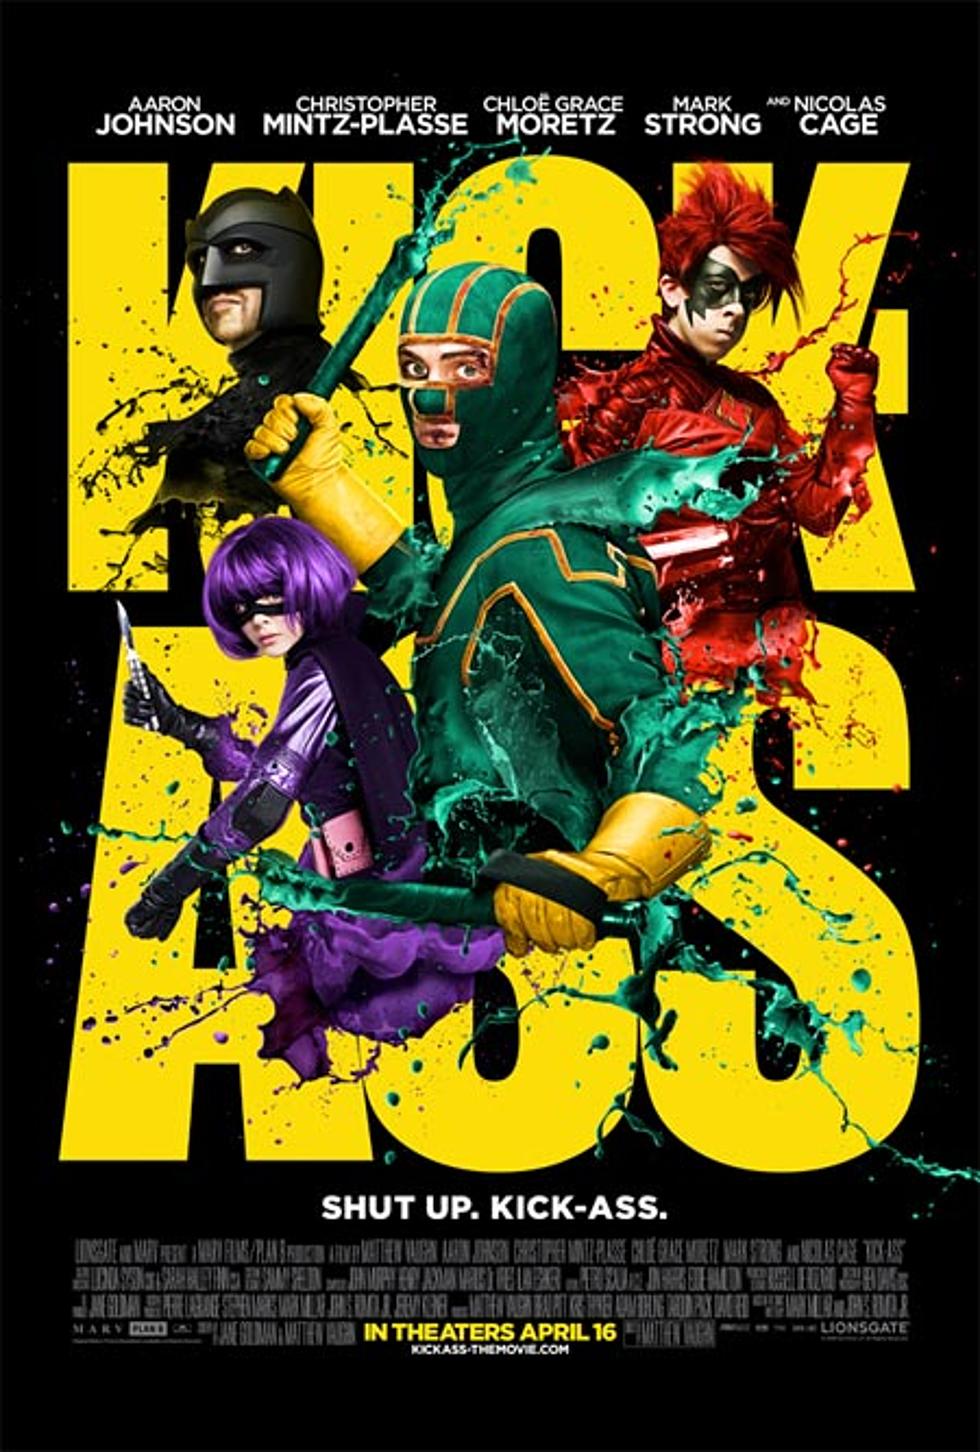 Kick-Ass: The Movie: The Review